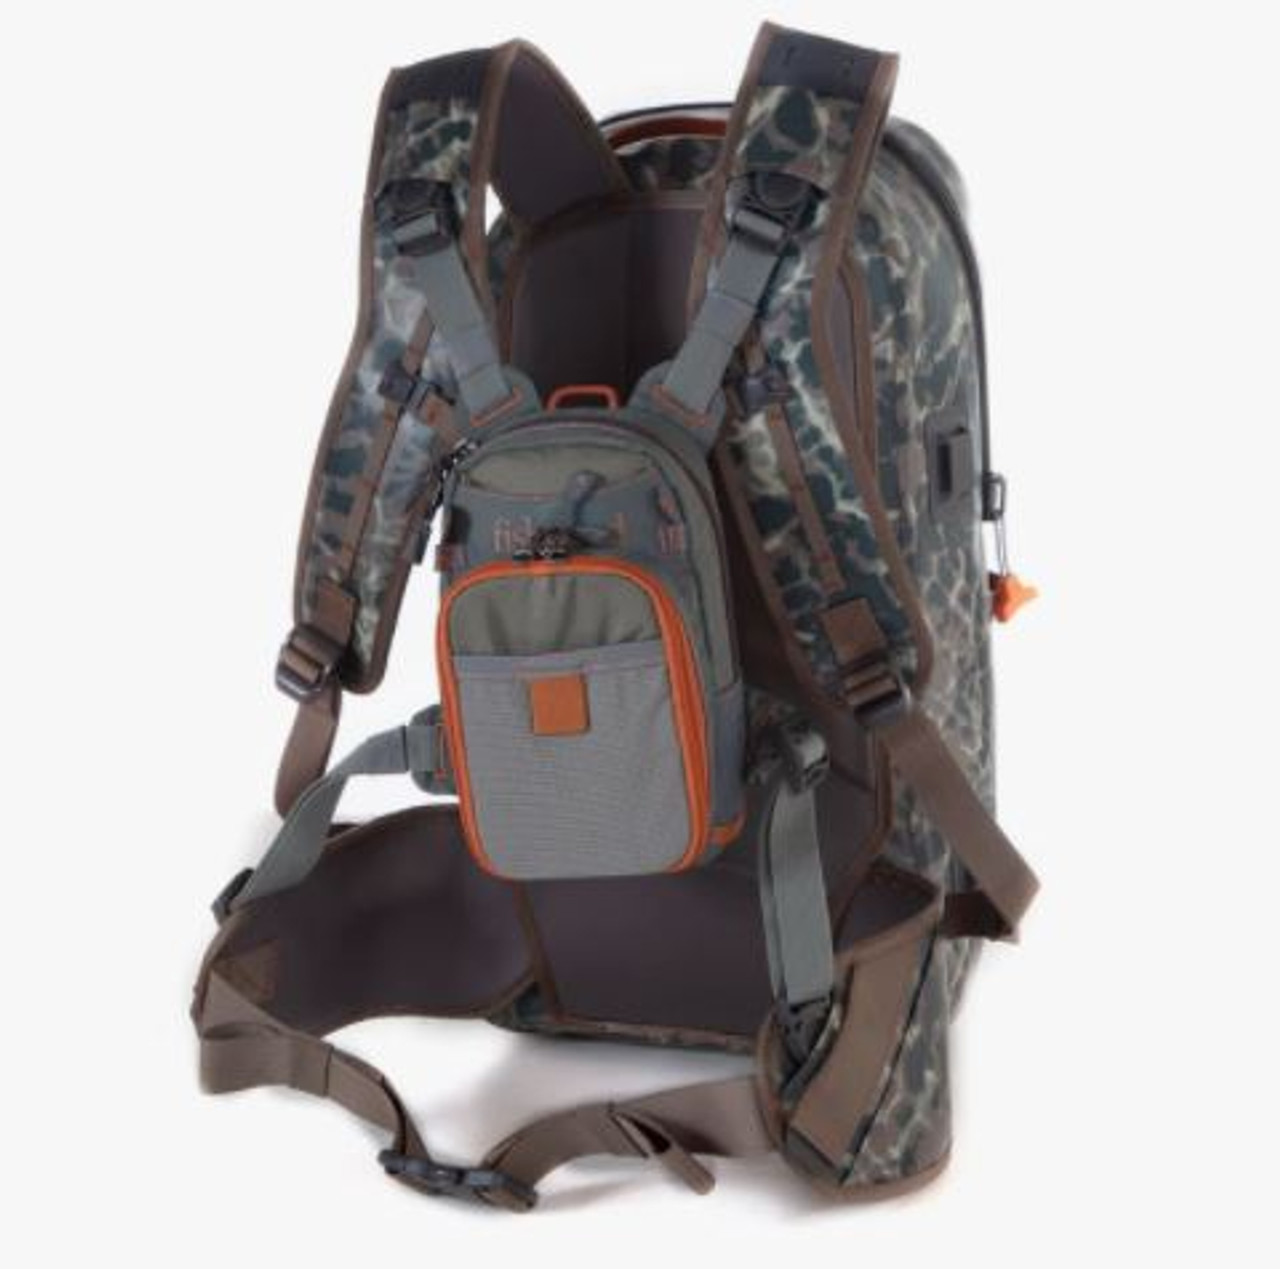 Thunderhead Submersible Backpack - Eco Riverbed Camo